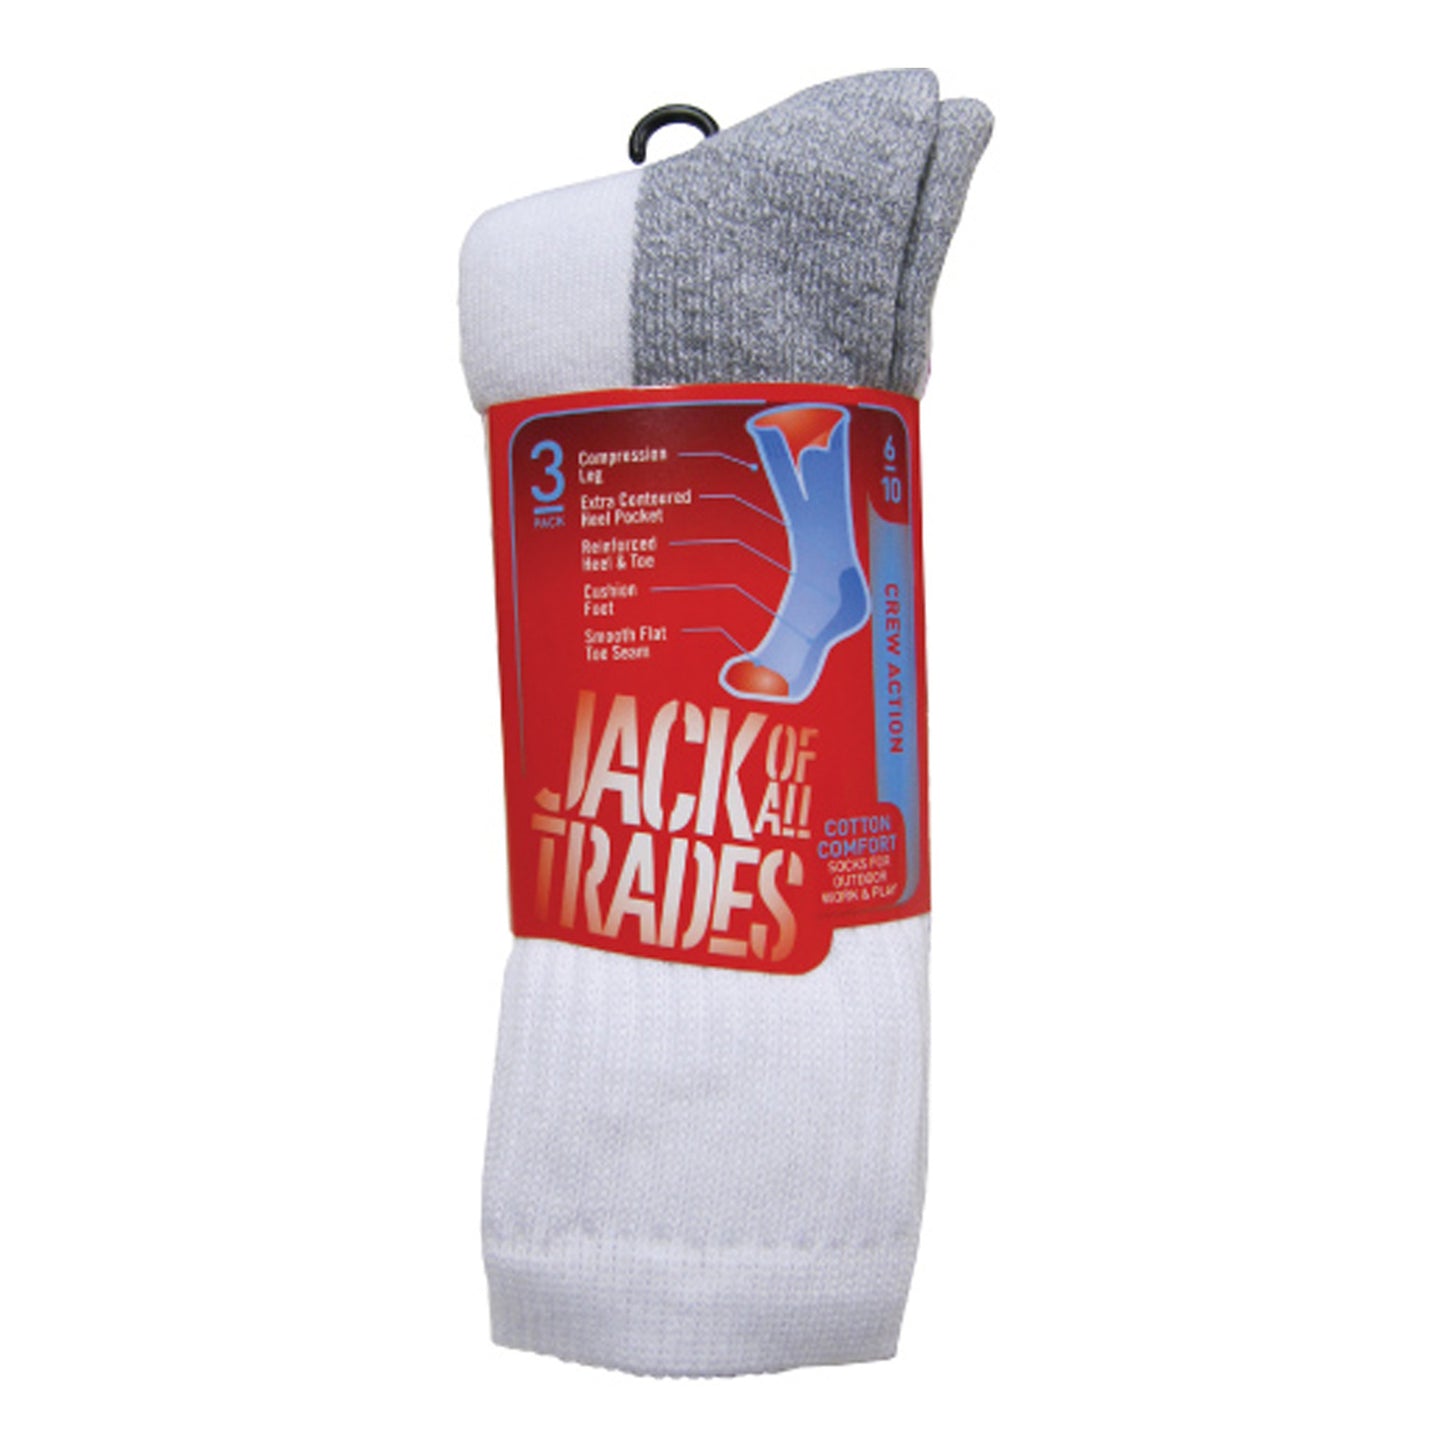 Jack of All Trades 3 Pack Cotton Action Crew Sock